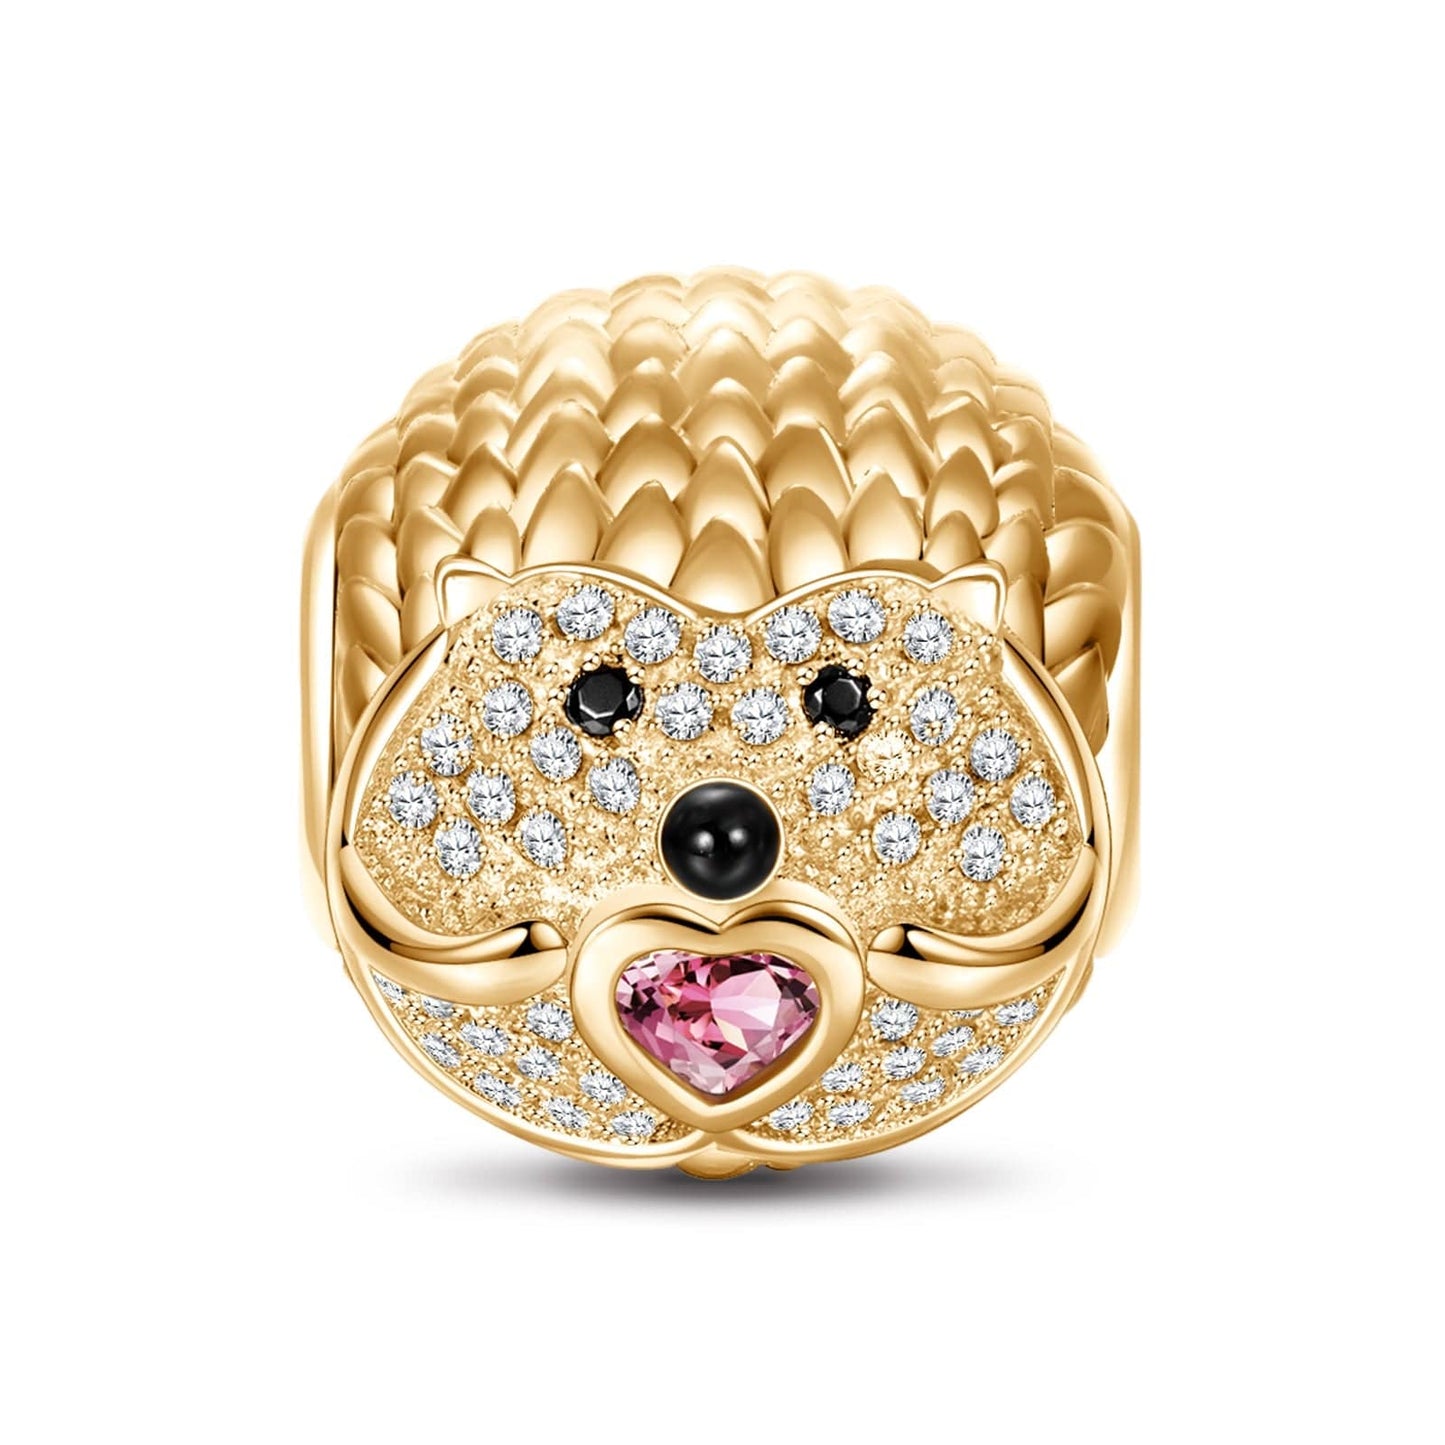 Hedgehog Tarnish-resistant Silver Charms With Enamel In 14K Gold Plated